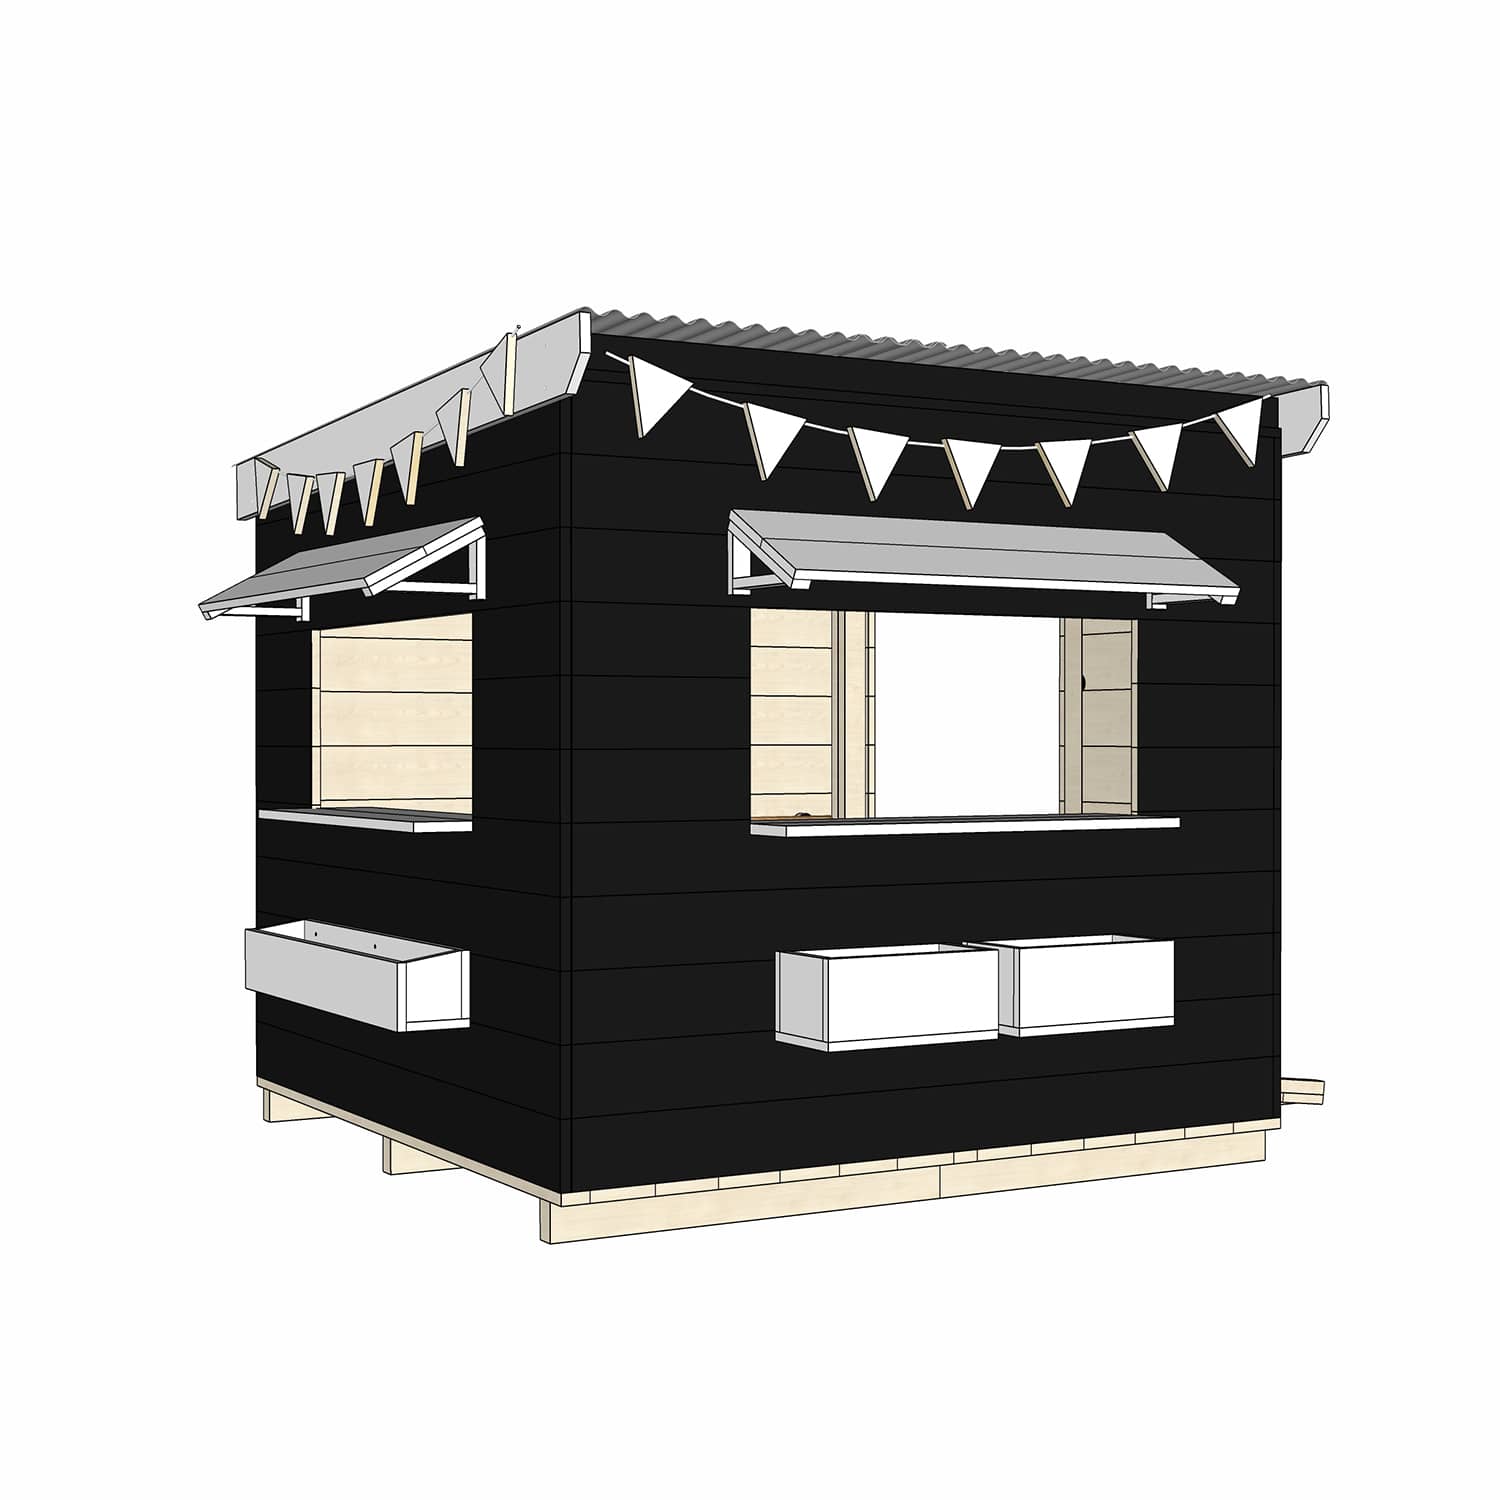 Commercial Signature Style: Accessible Flat Roof Cubby Houses